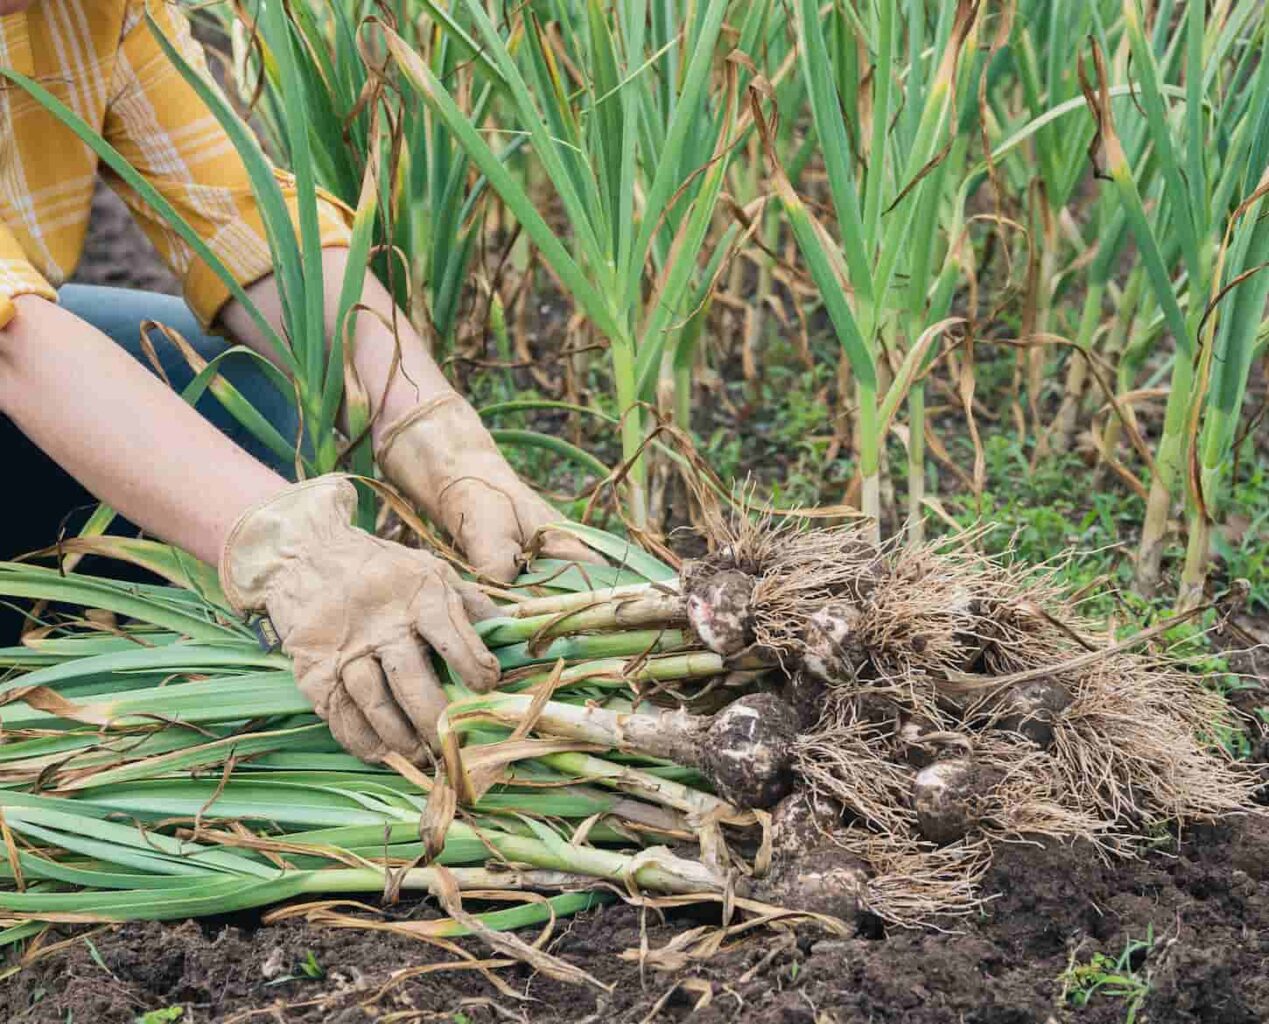 An image of a farmer's hands with gloves is bunching freshly harvested garlic in the vegetable field.